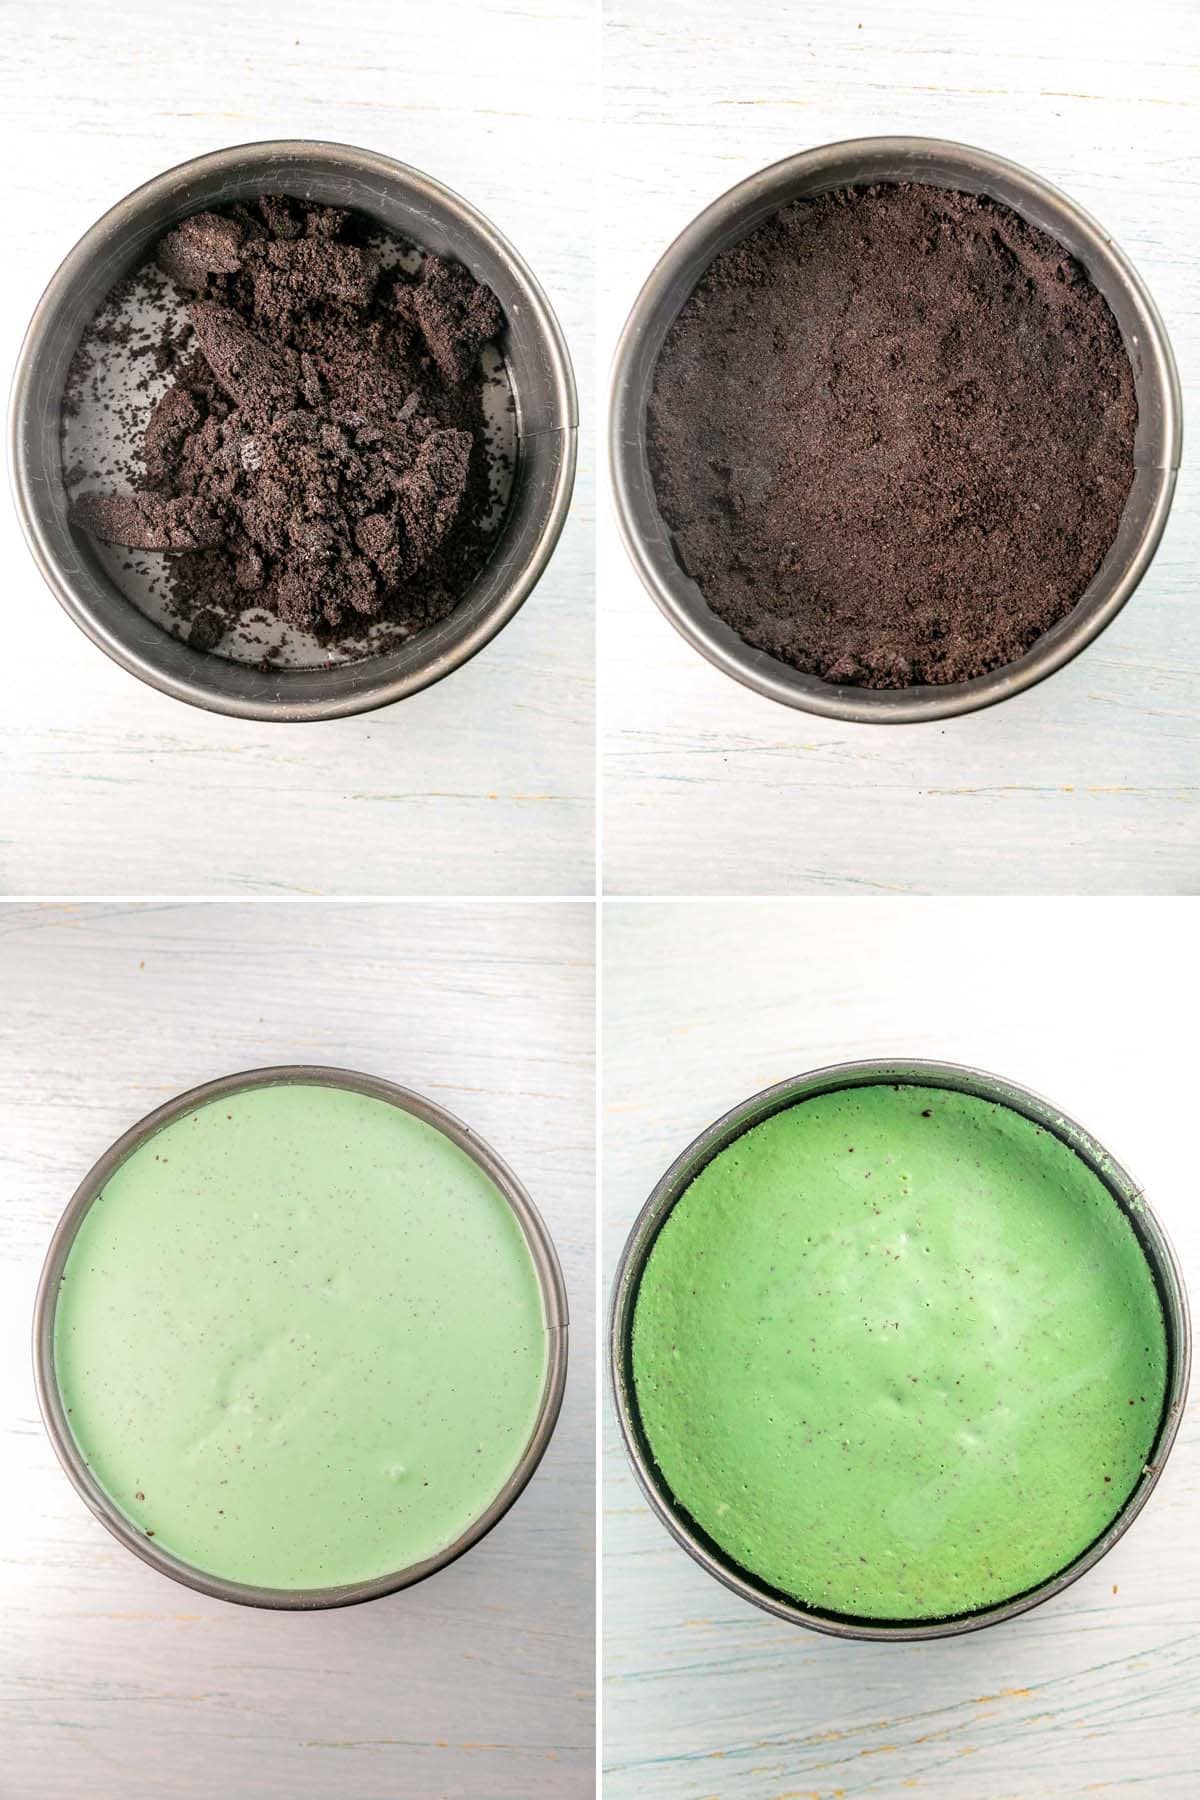 step by step photos showing oreo crumbs in a springform pan, oreo crust, cheesecake before baking, and cheesecake after baking